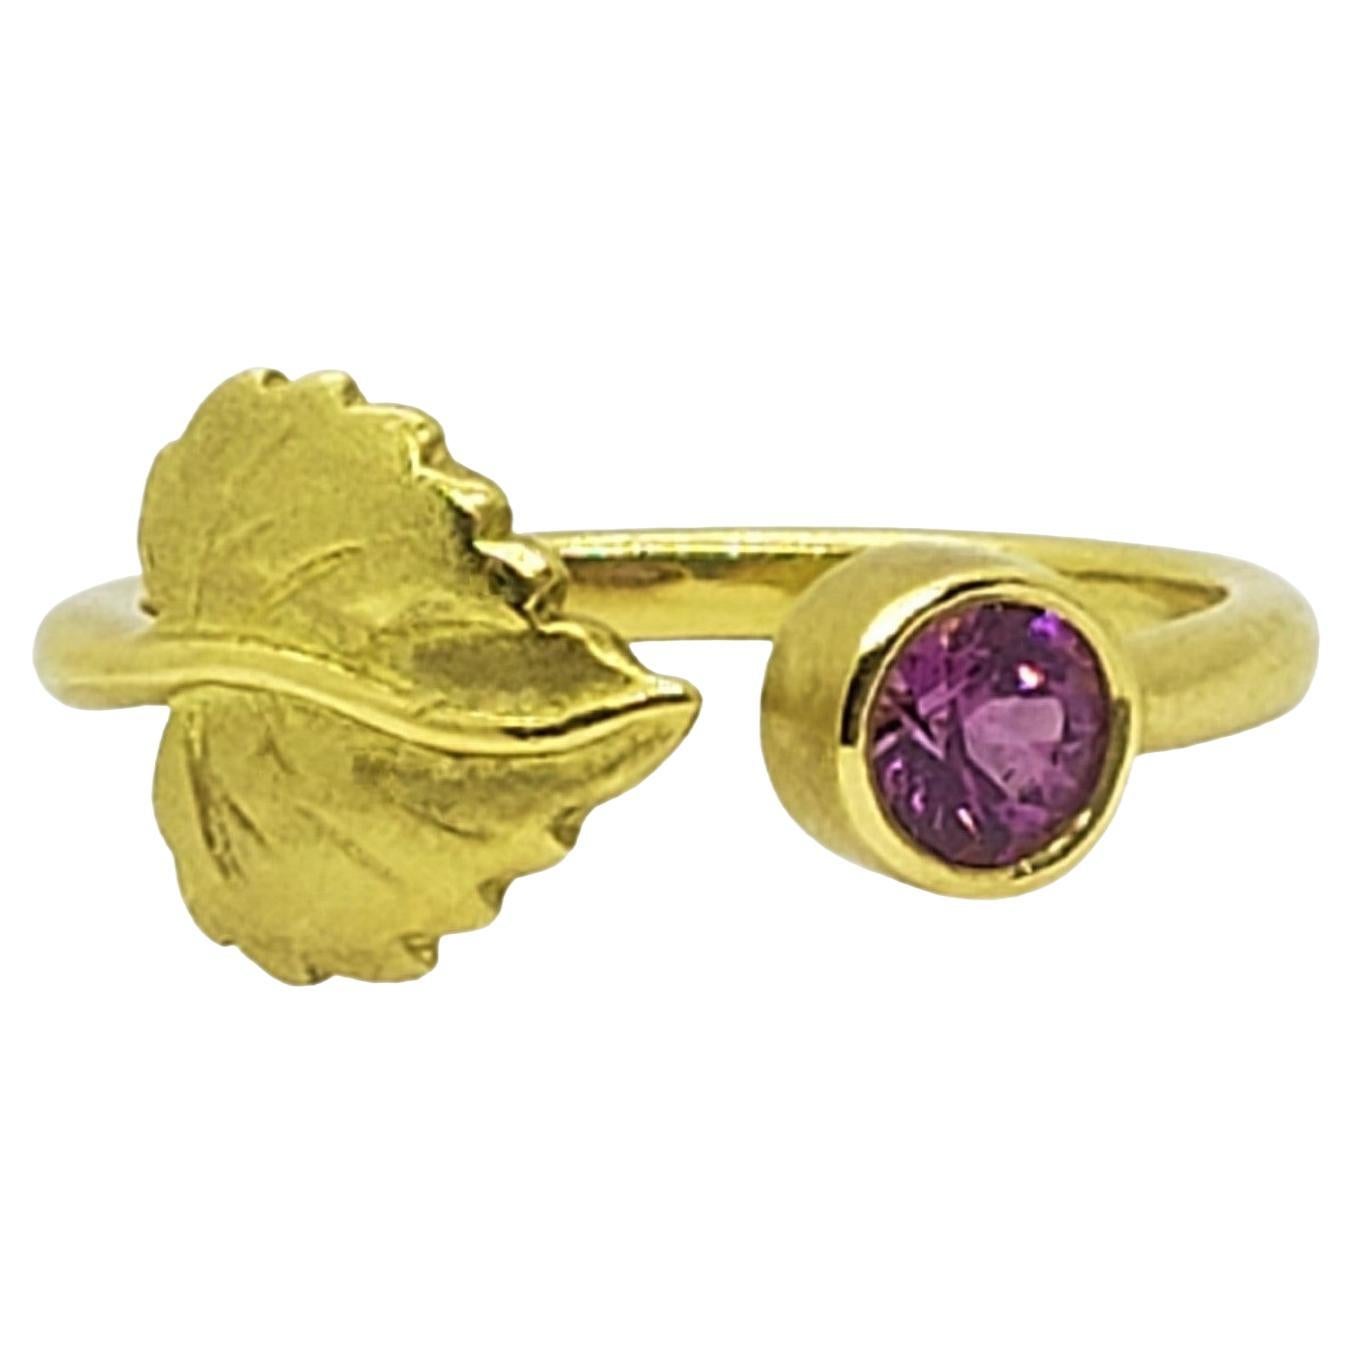 Stackette 18K Gold Gemstone Ring Collection highlighting the Aspen Leaf Style For Sale